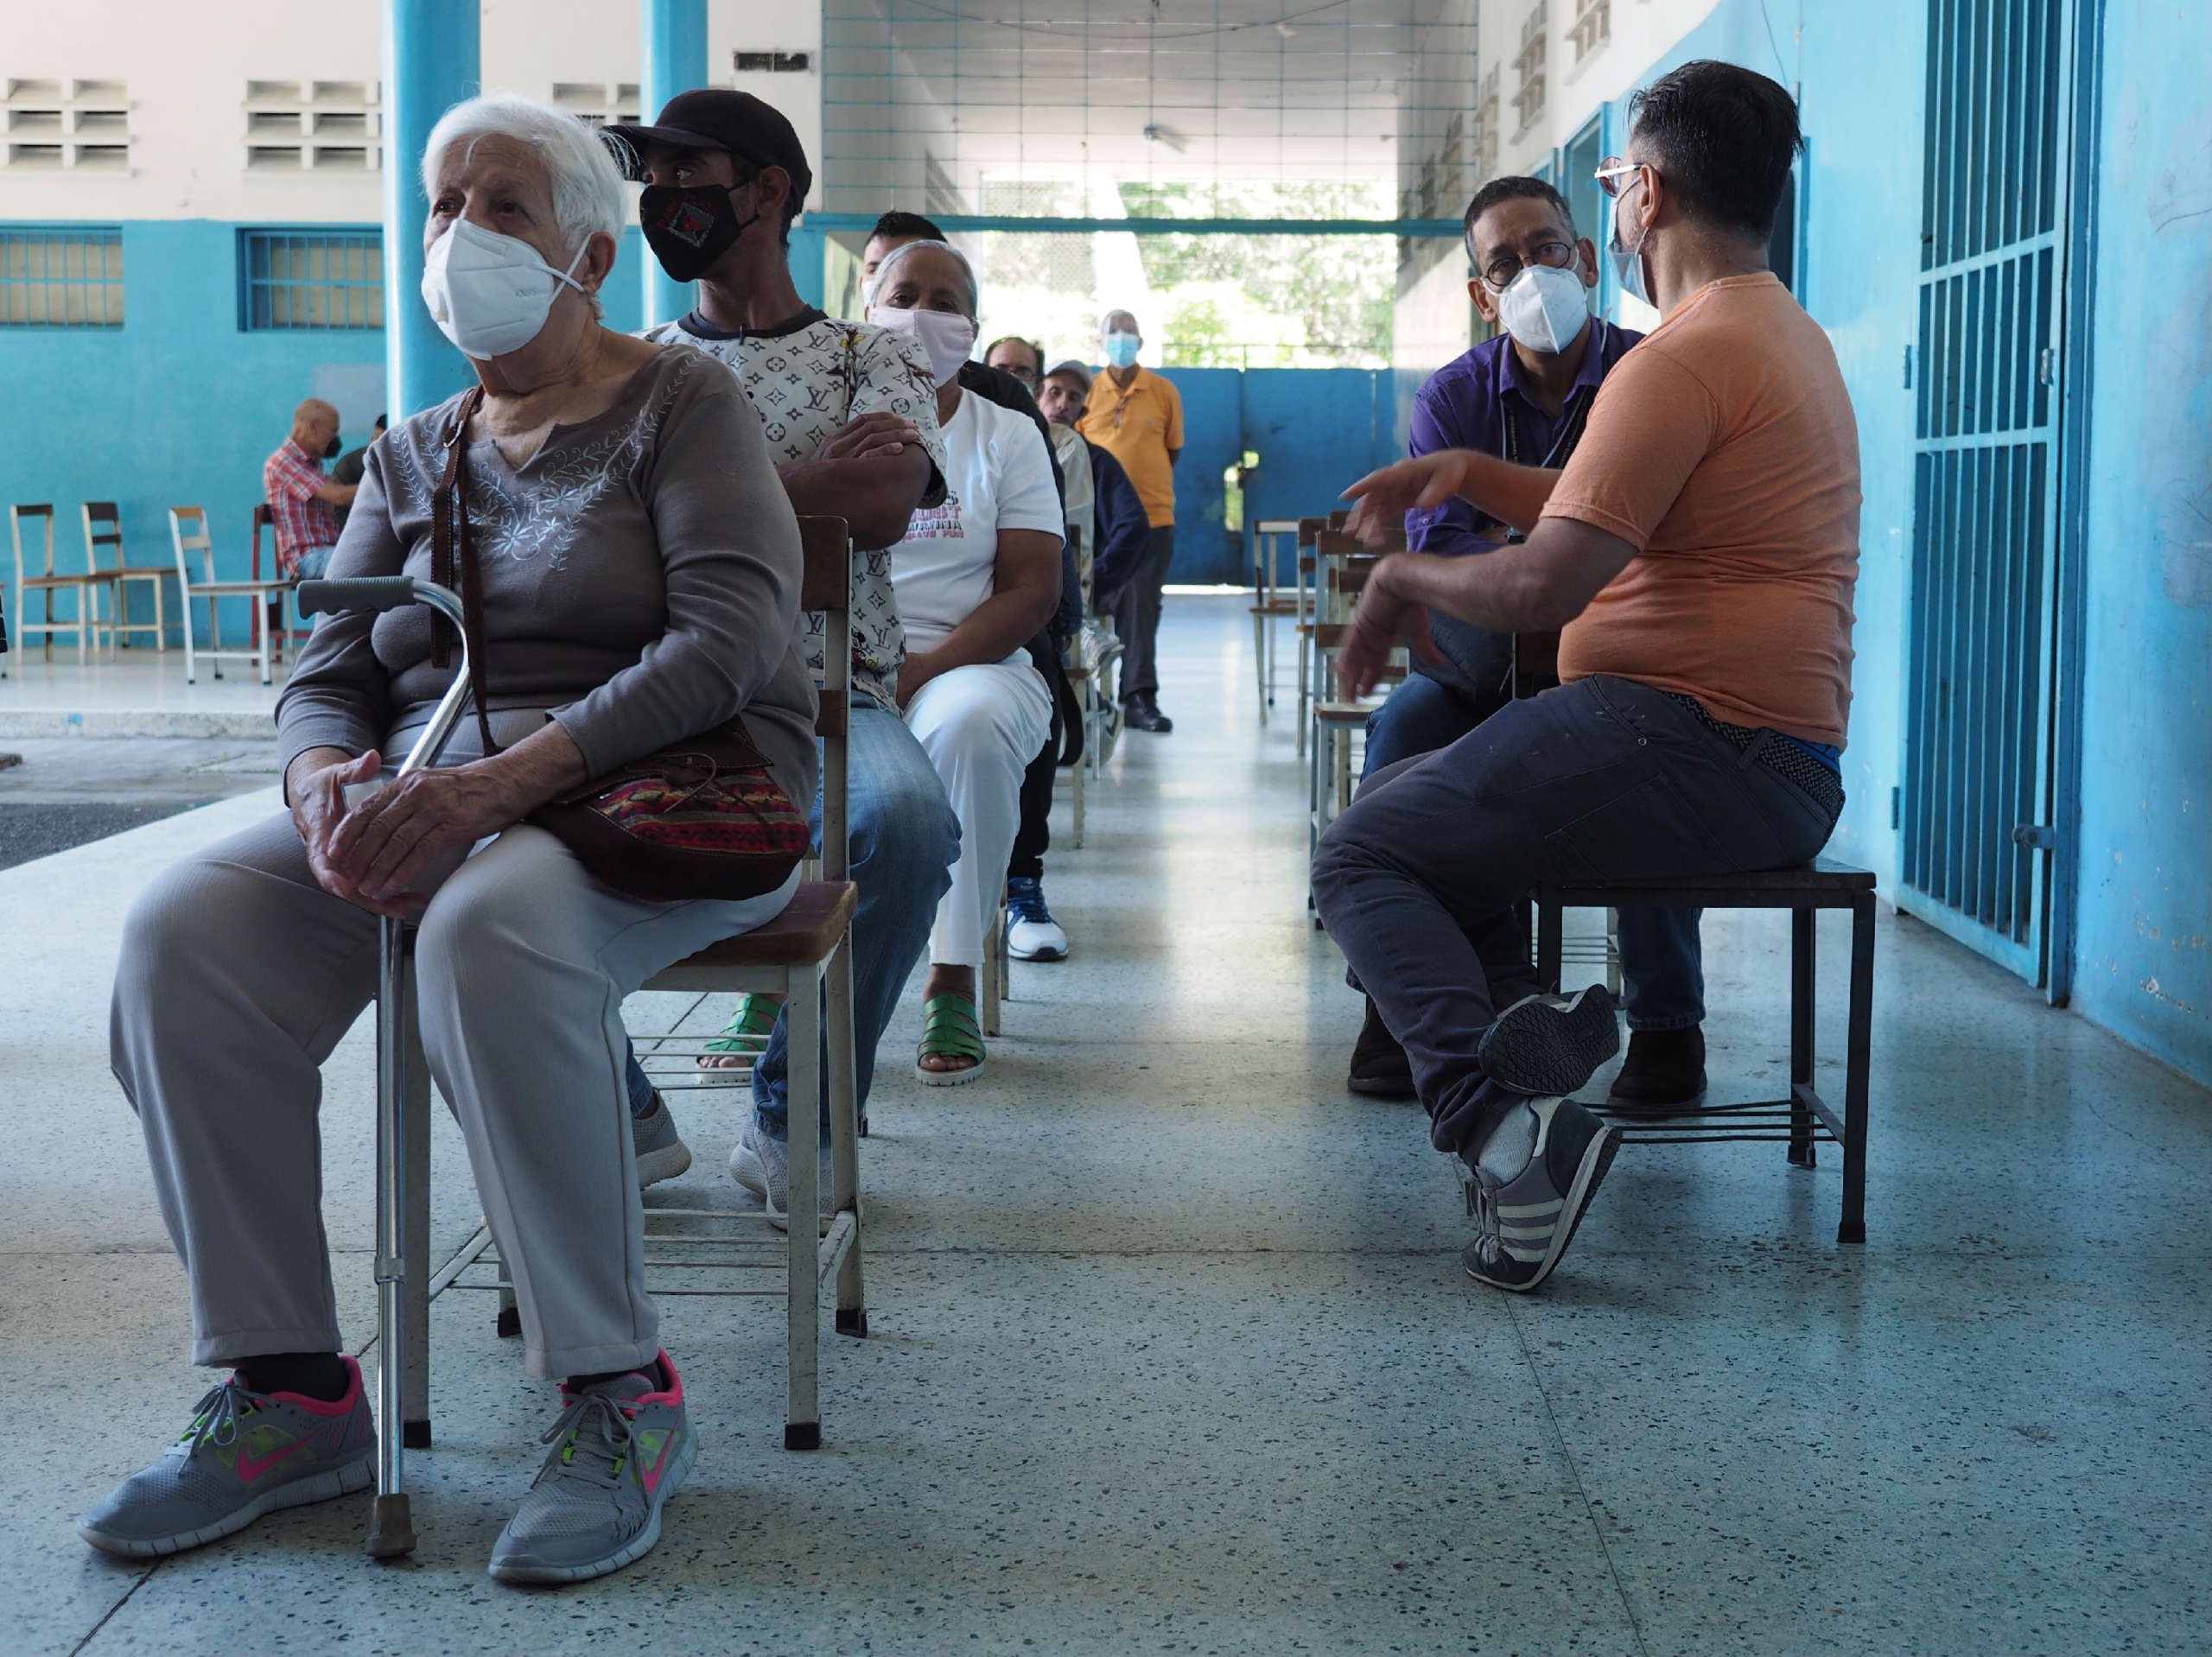 Voters await their turn to vote, abiding by health protocols, inside the Liceo Pedro Emilio Coll in the Coche Parish in Caracas, Venezuela during elections on November 21, 2021.